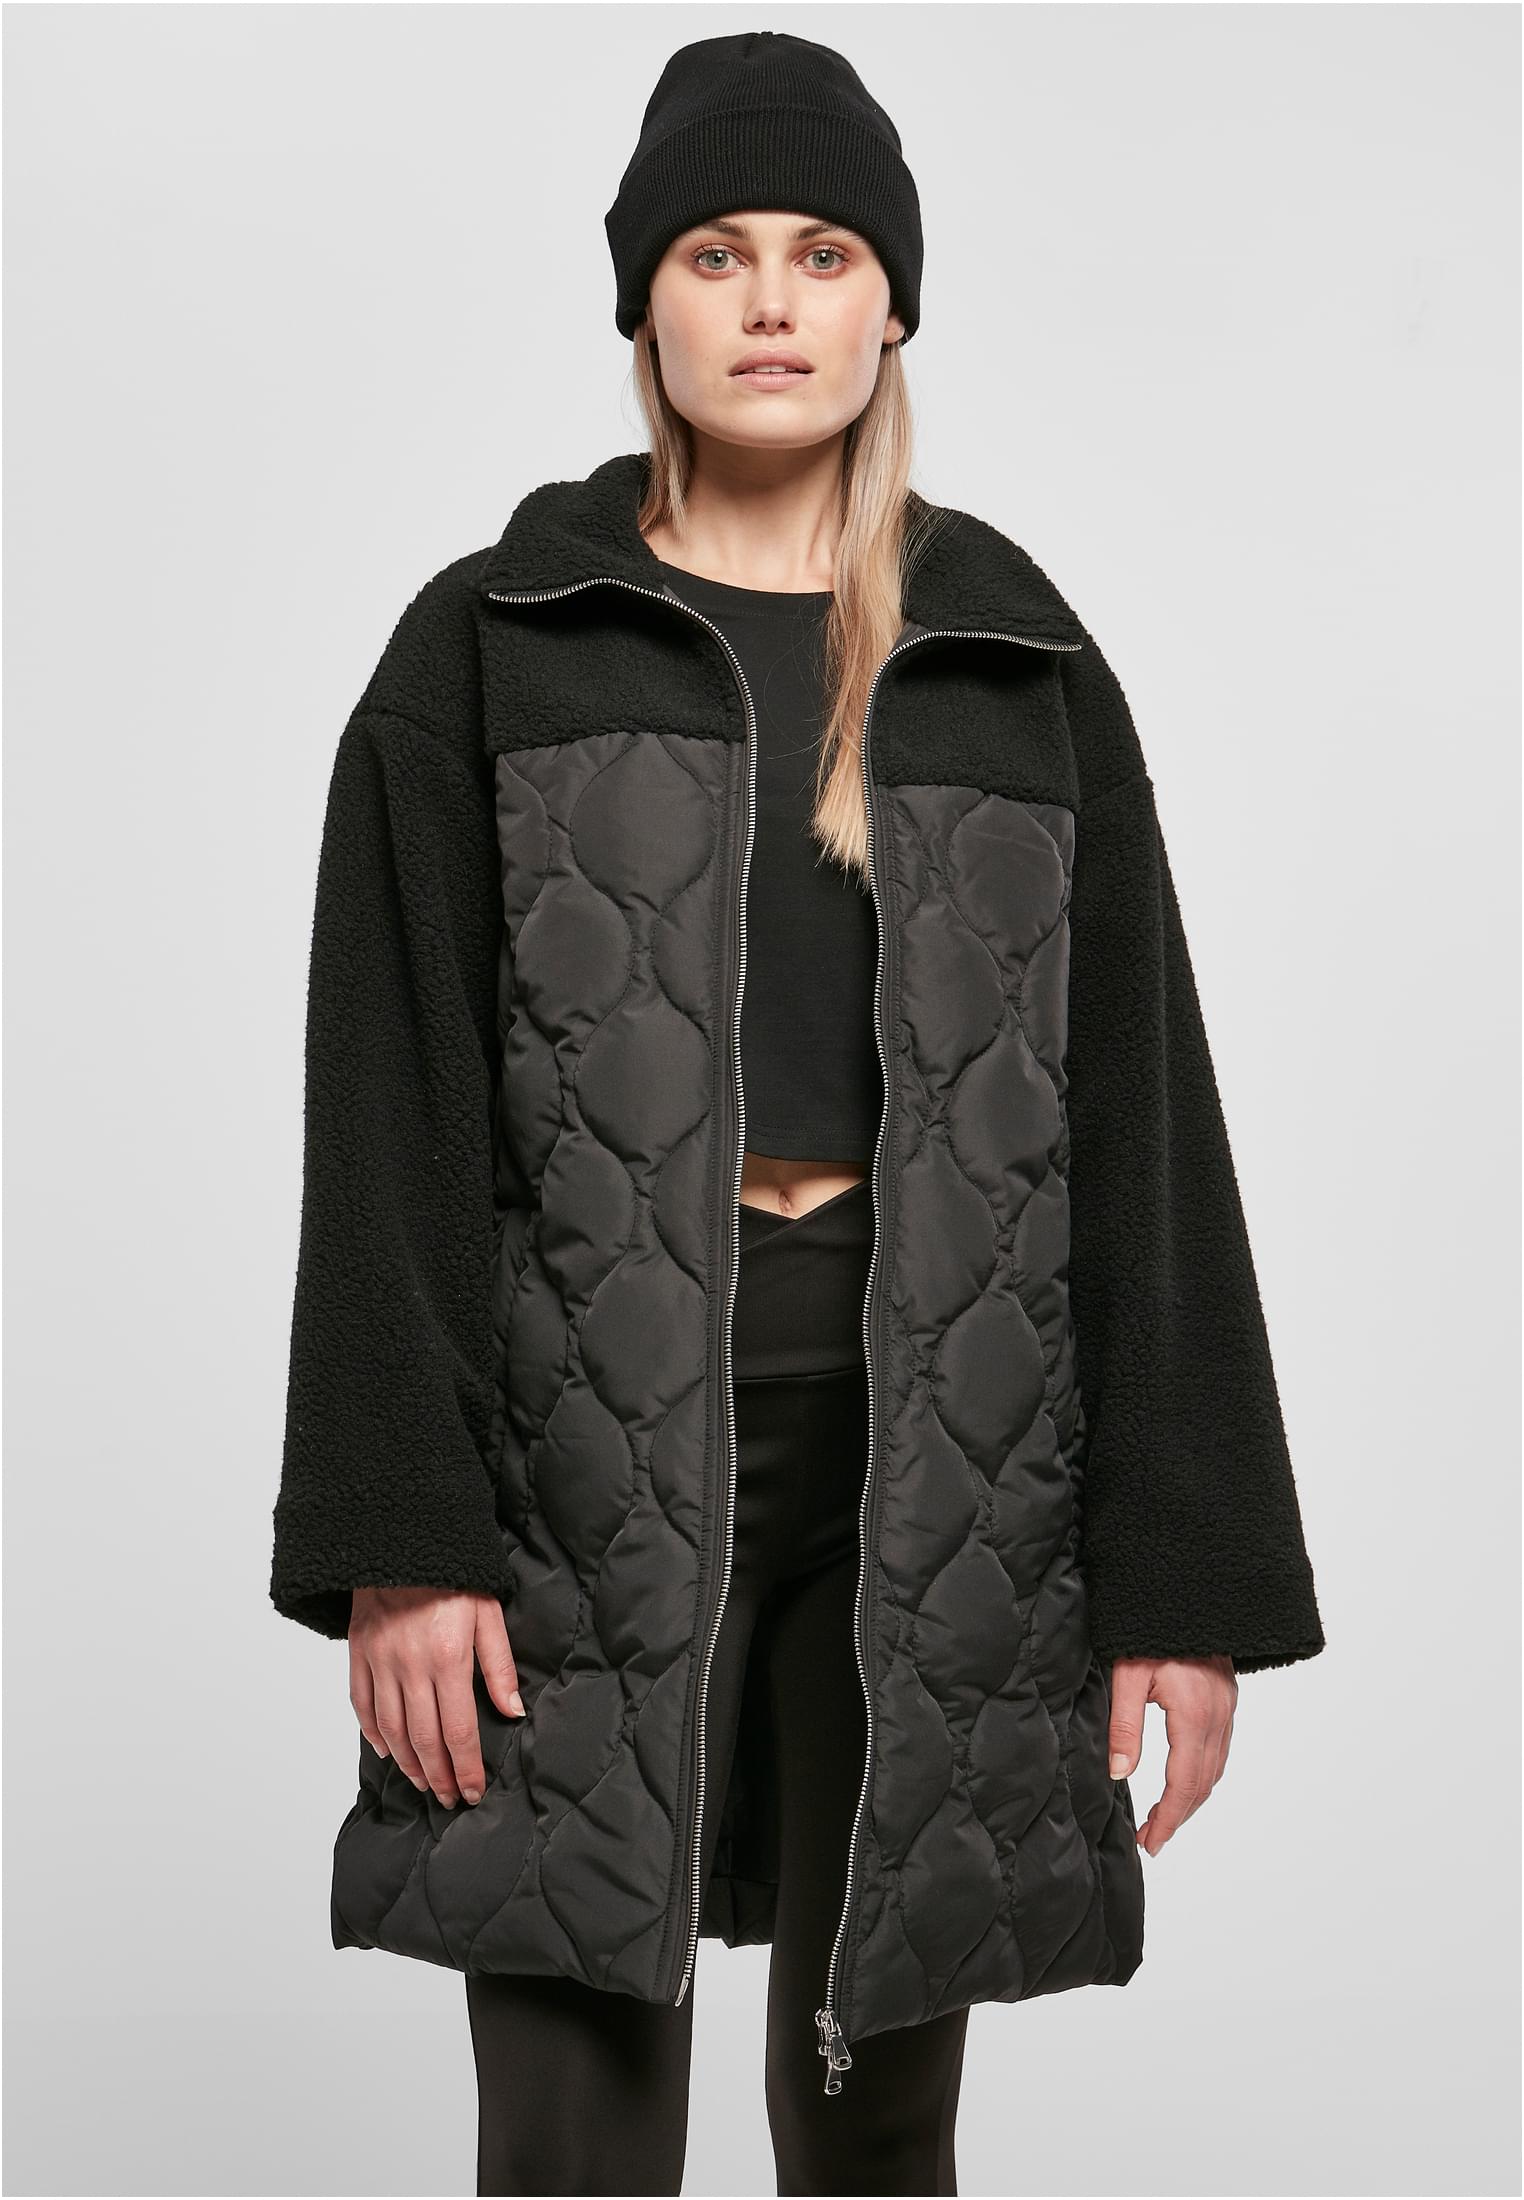 Women's Oversized Sherpa Quilted Coat Black